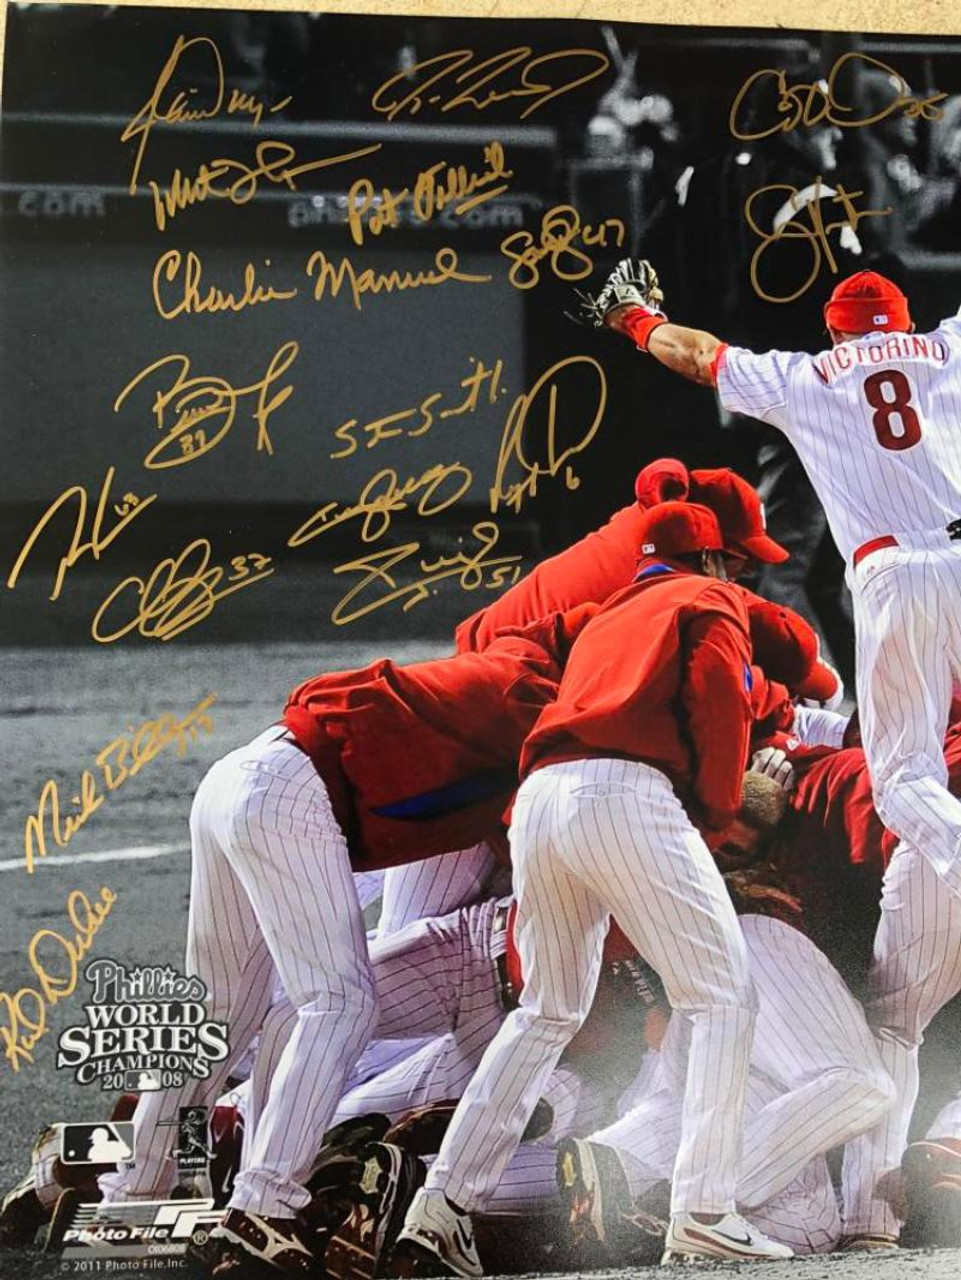 2008 Philadelphia Phillies World Series Champs Team Signed Jersey MLB —  Showpieces Sports